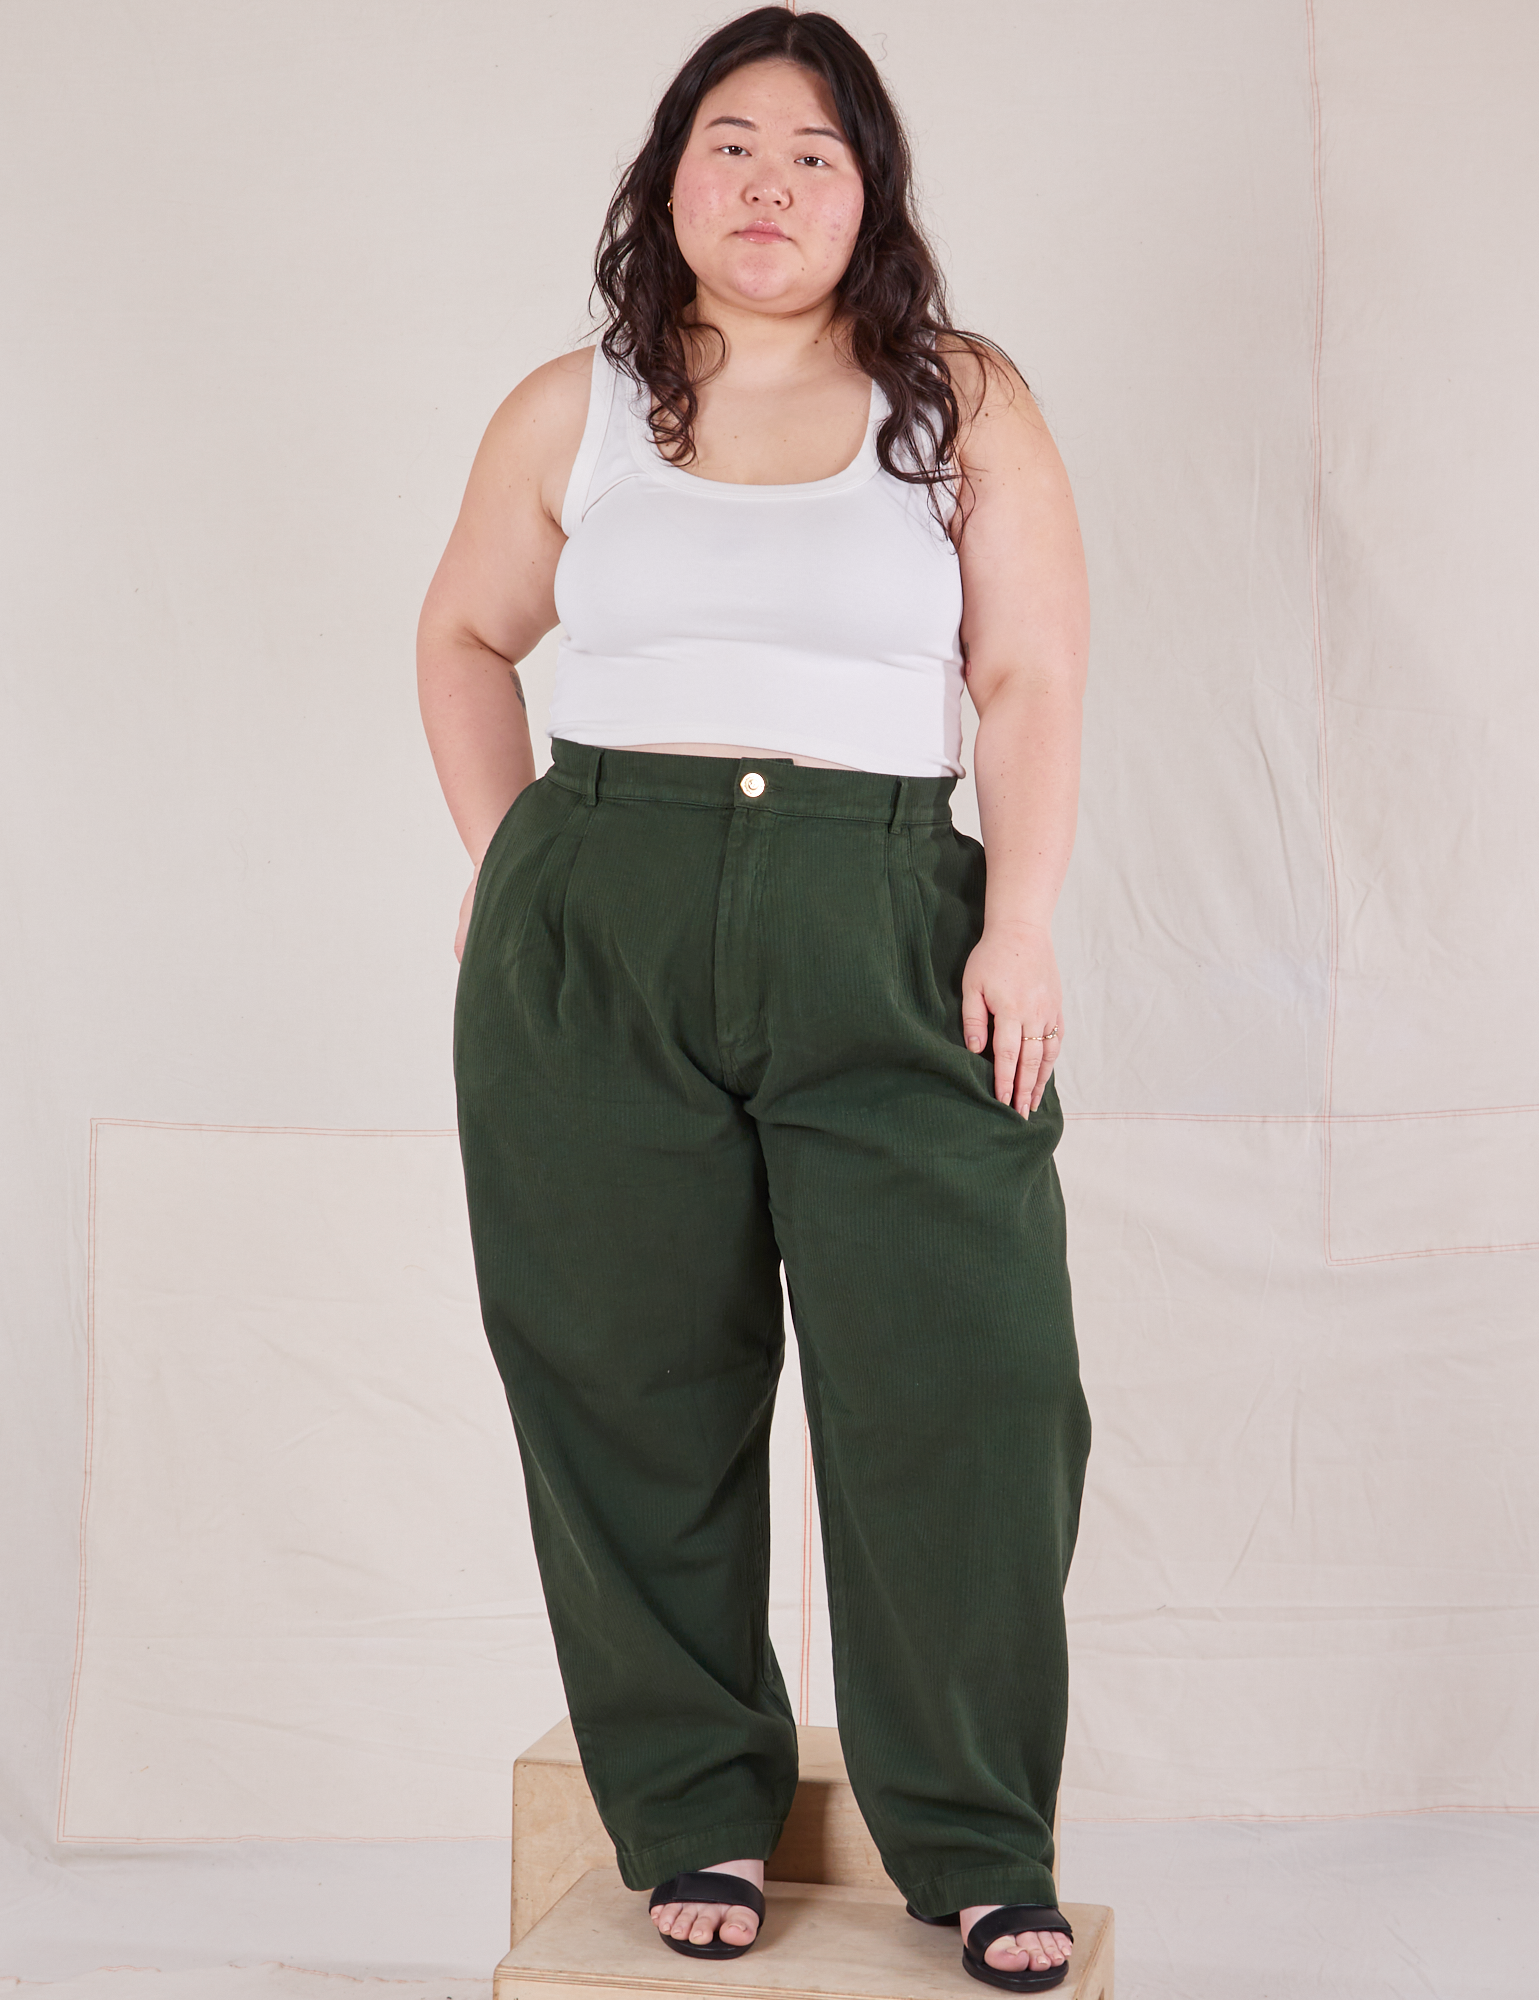 Ashley is 5&#39;7&quot; and wearing 1XL Heritage Trousers in Swamp Green and vintage off-white Cropped Tank Top